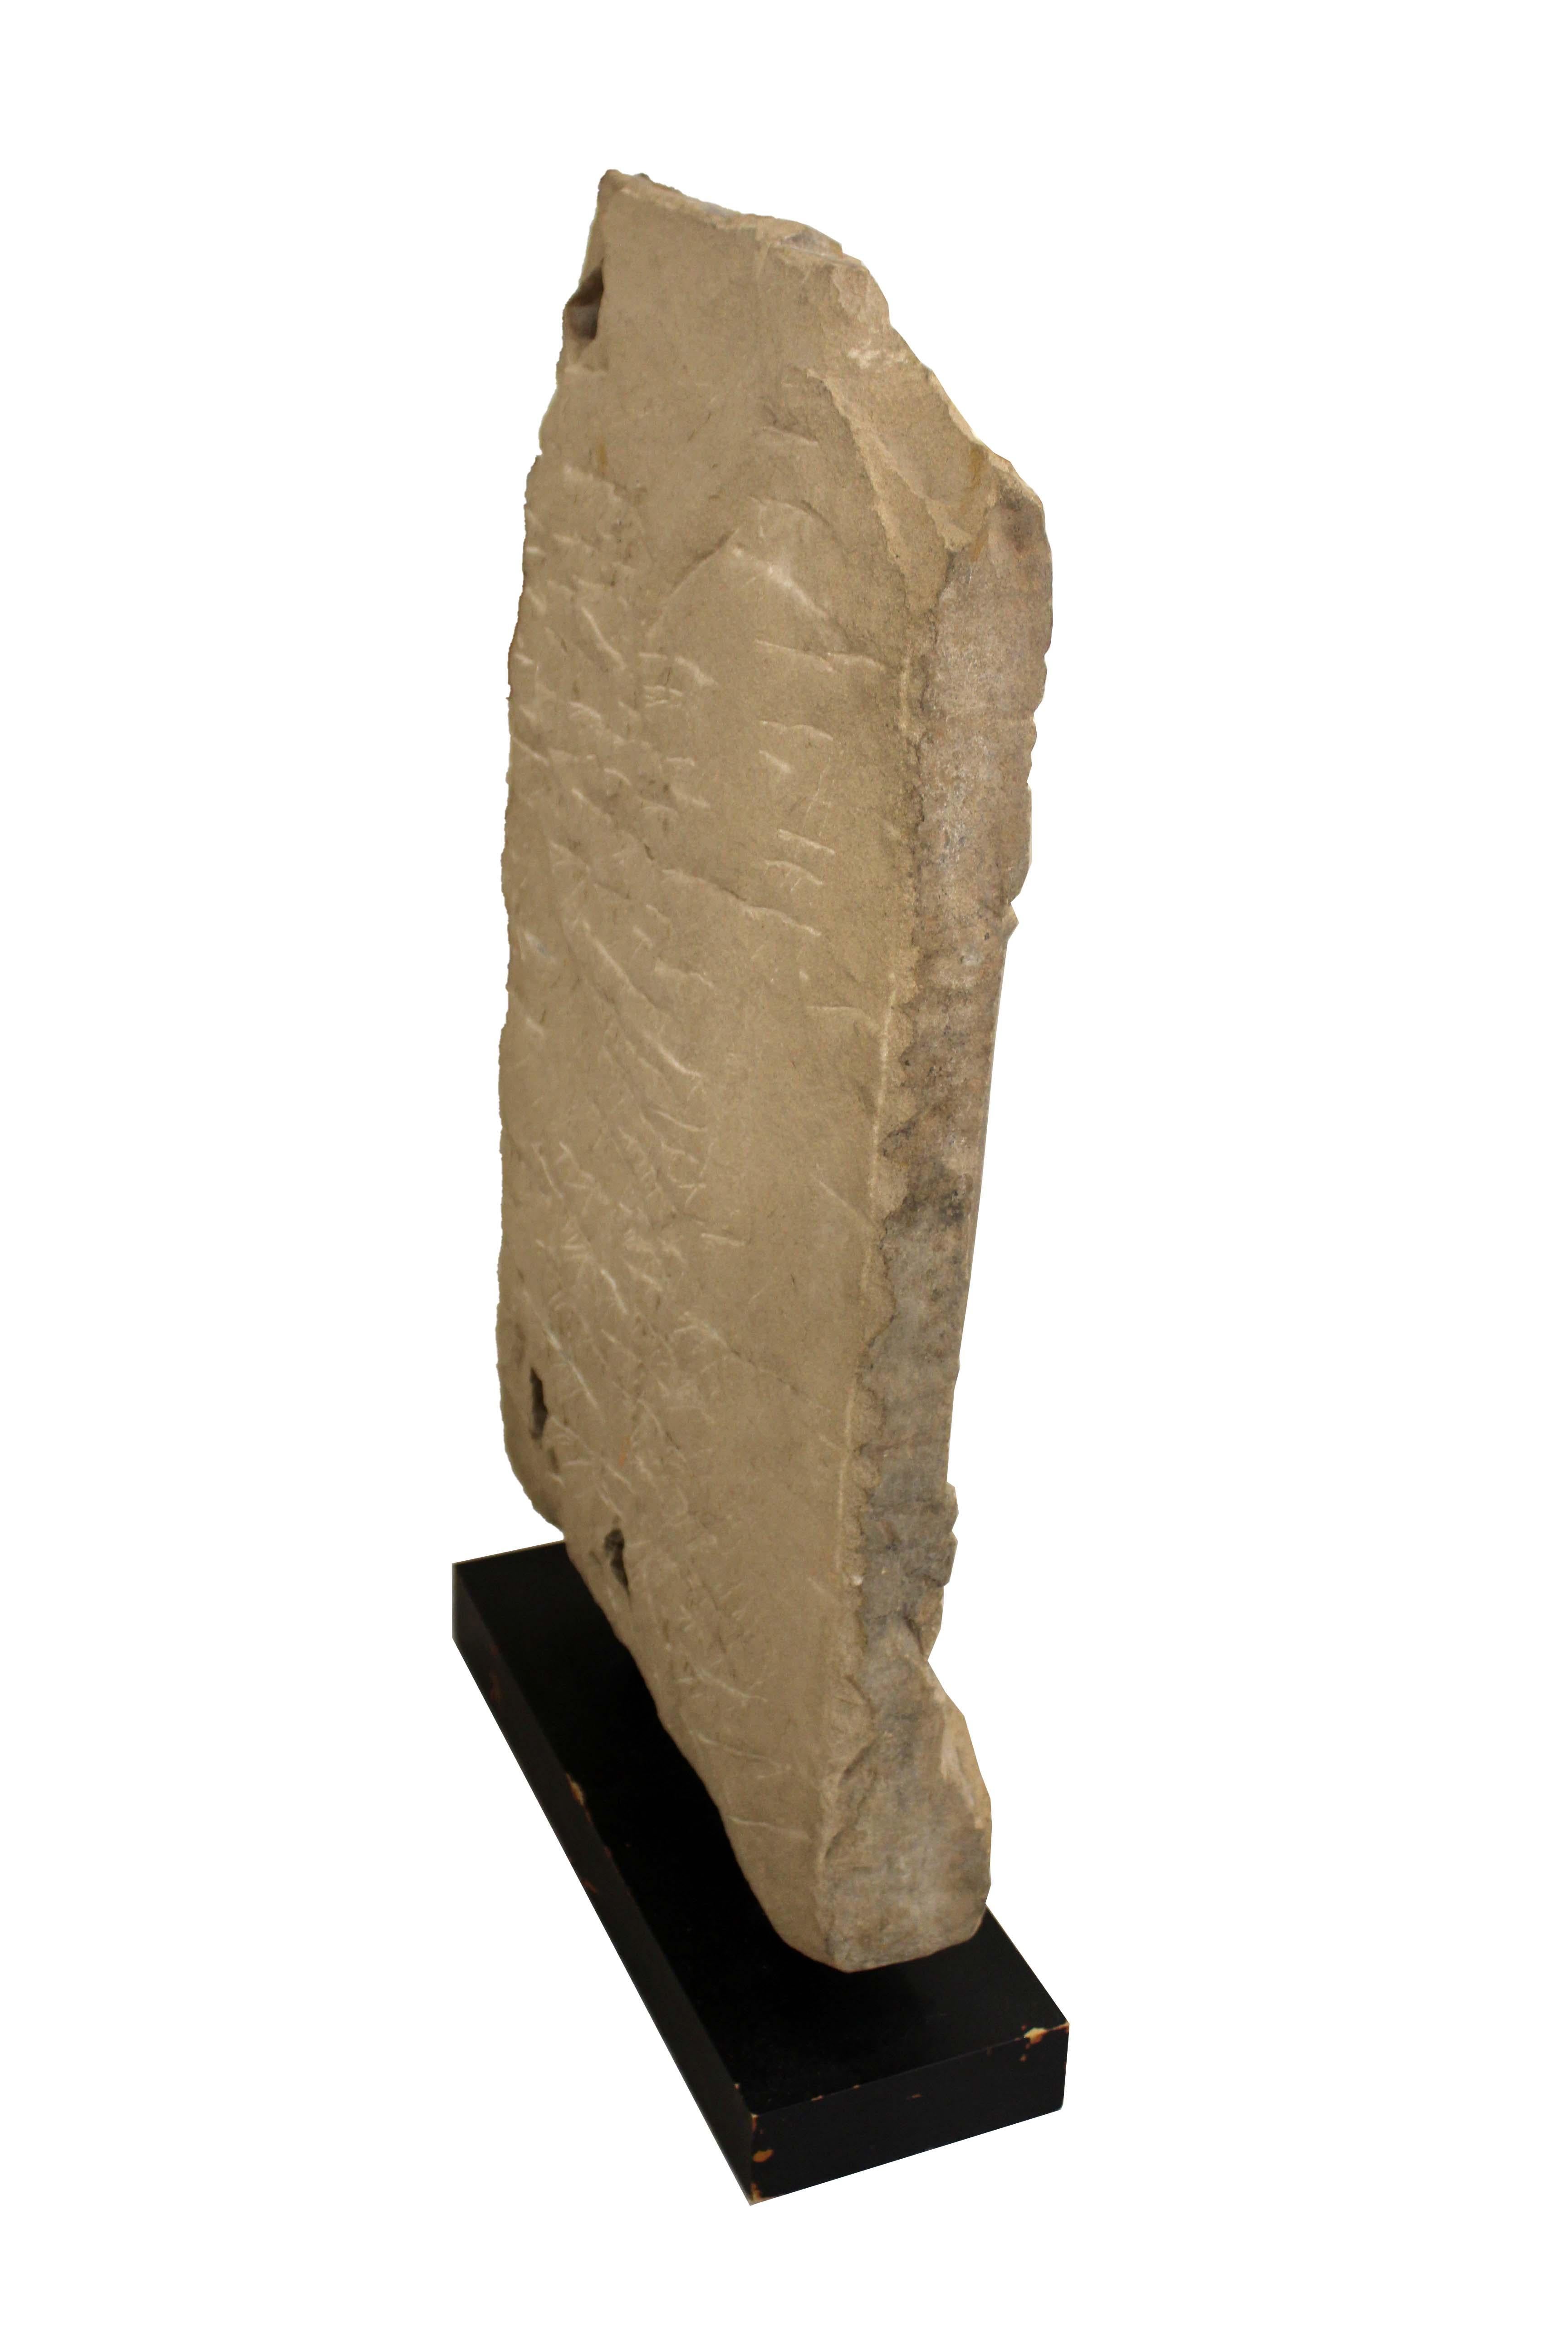 Antique Artifact Carved Temple Stele Stone Slab Art Sculpture In Good Condition For Sale In Keego Harbor, MI